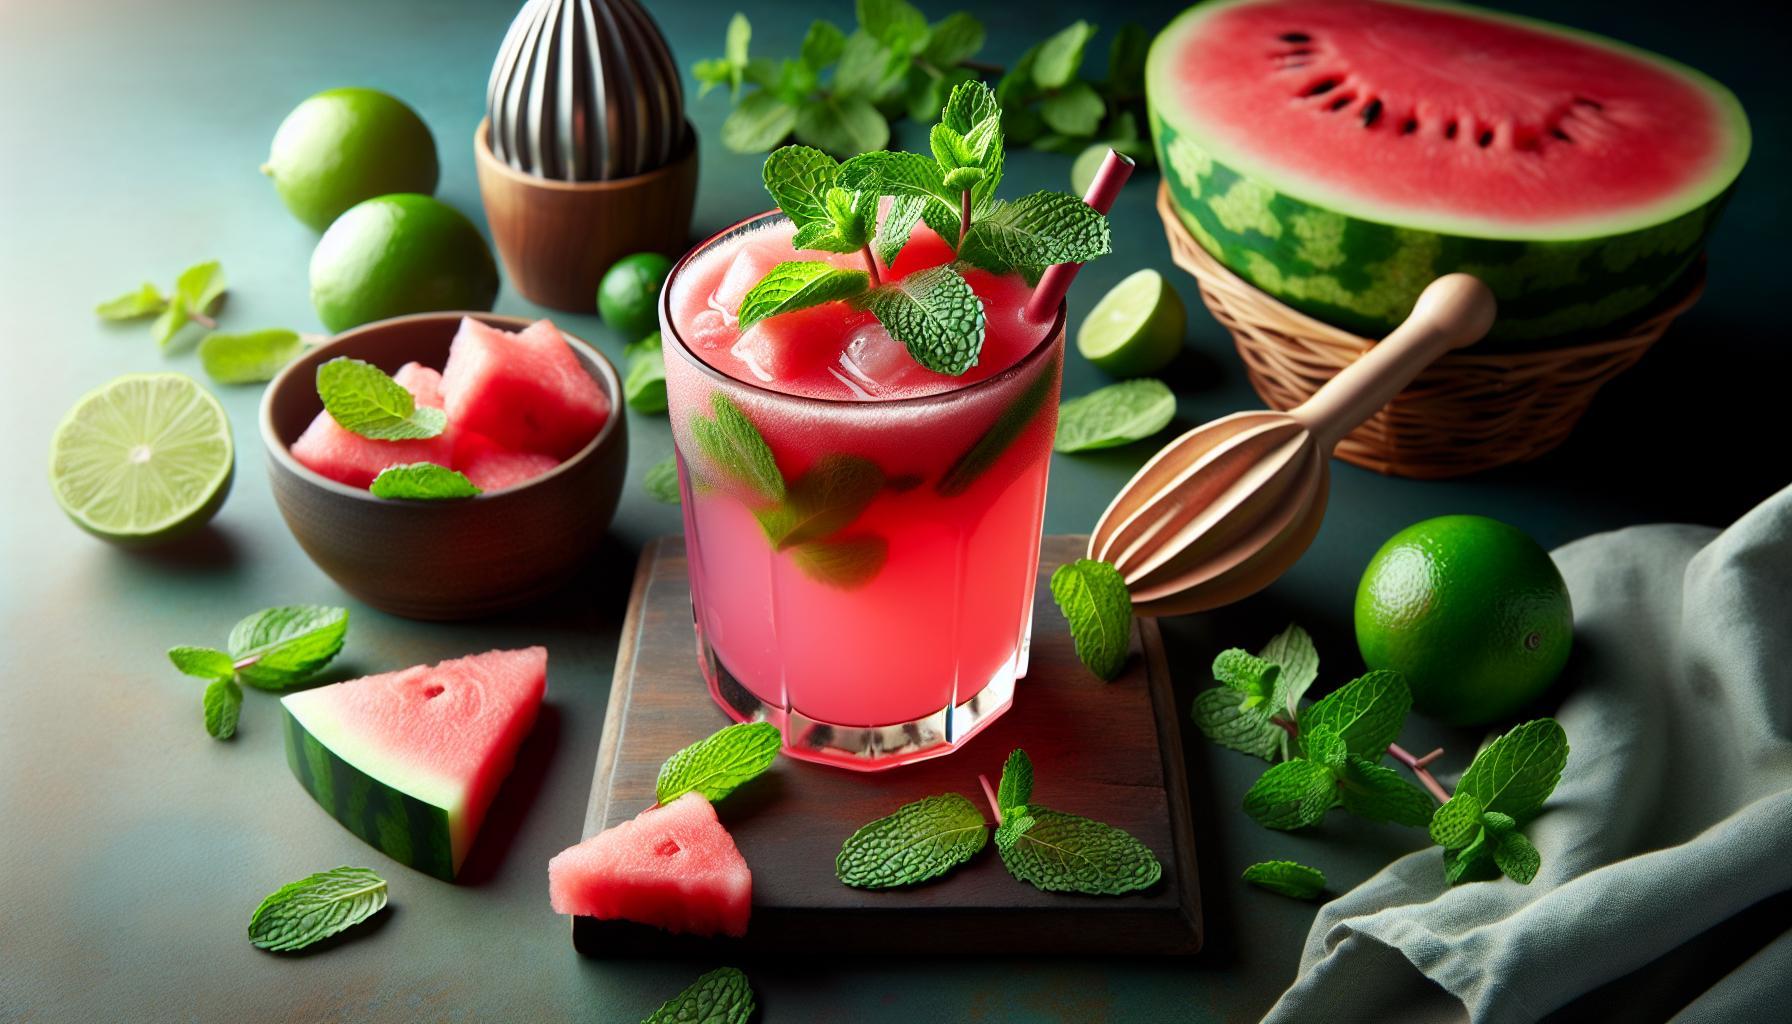 Refreshing Minty Watermelon Cooler Recipe to Beat the Summer Heat